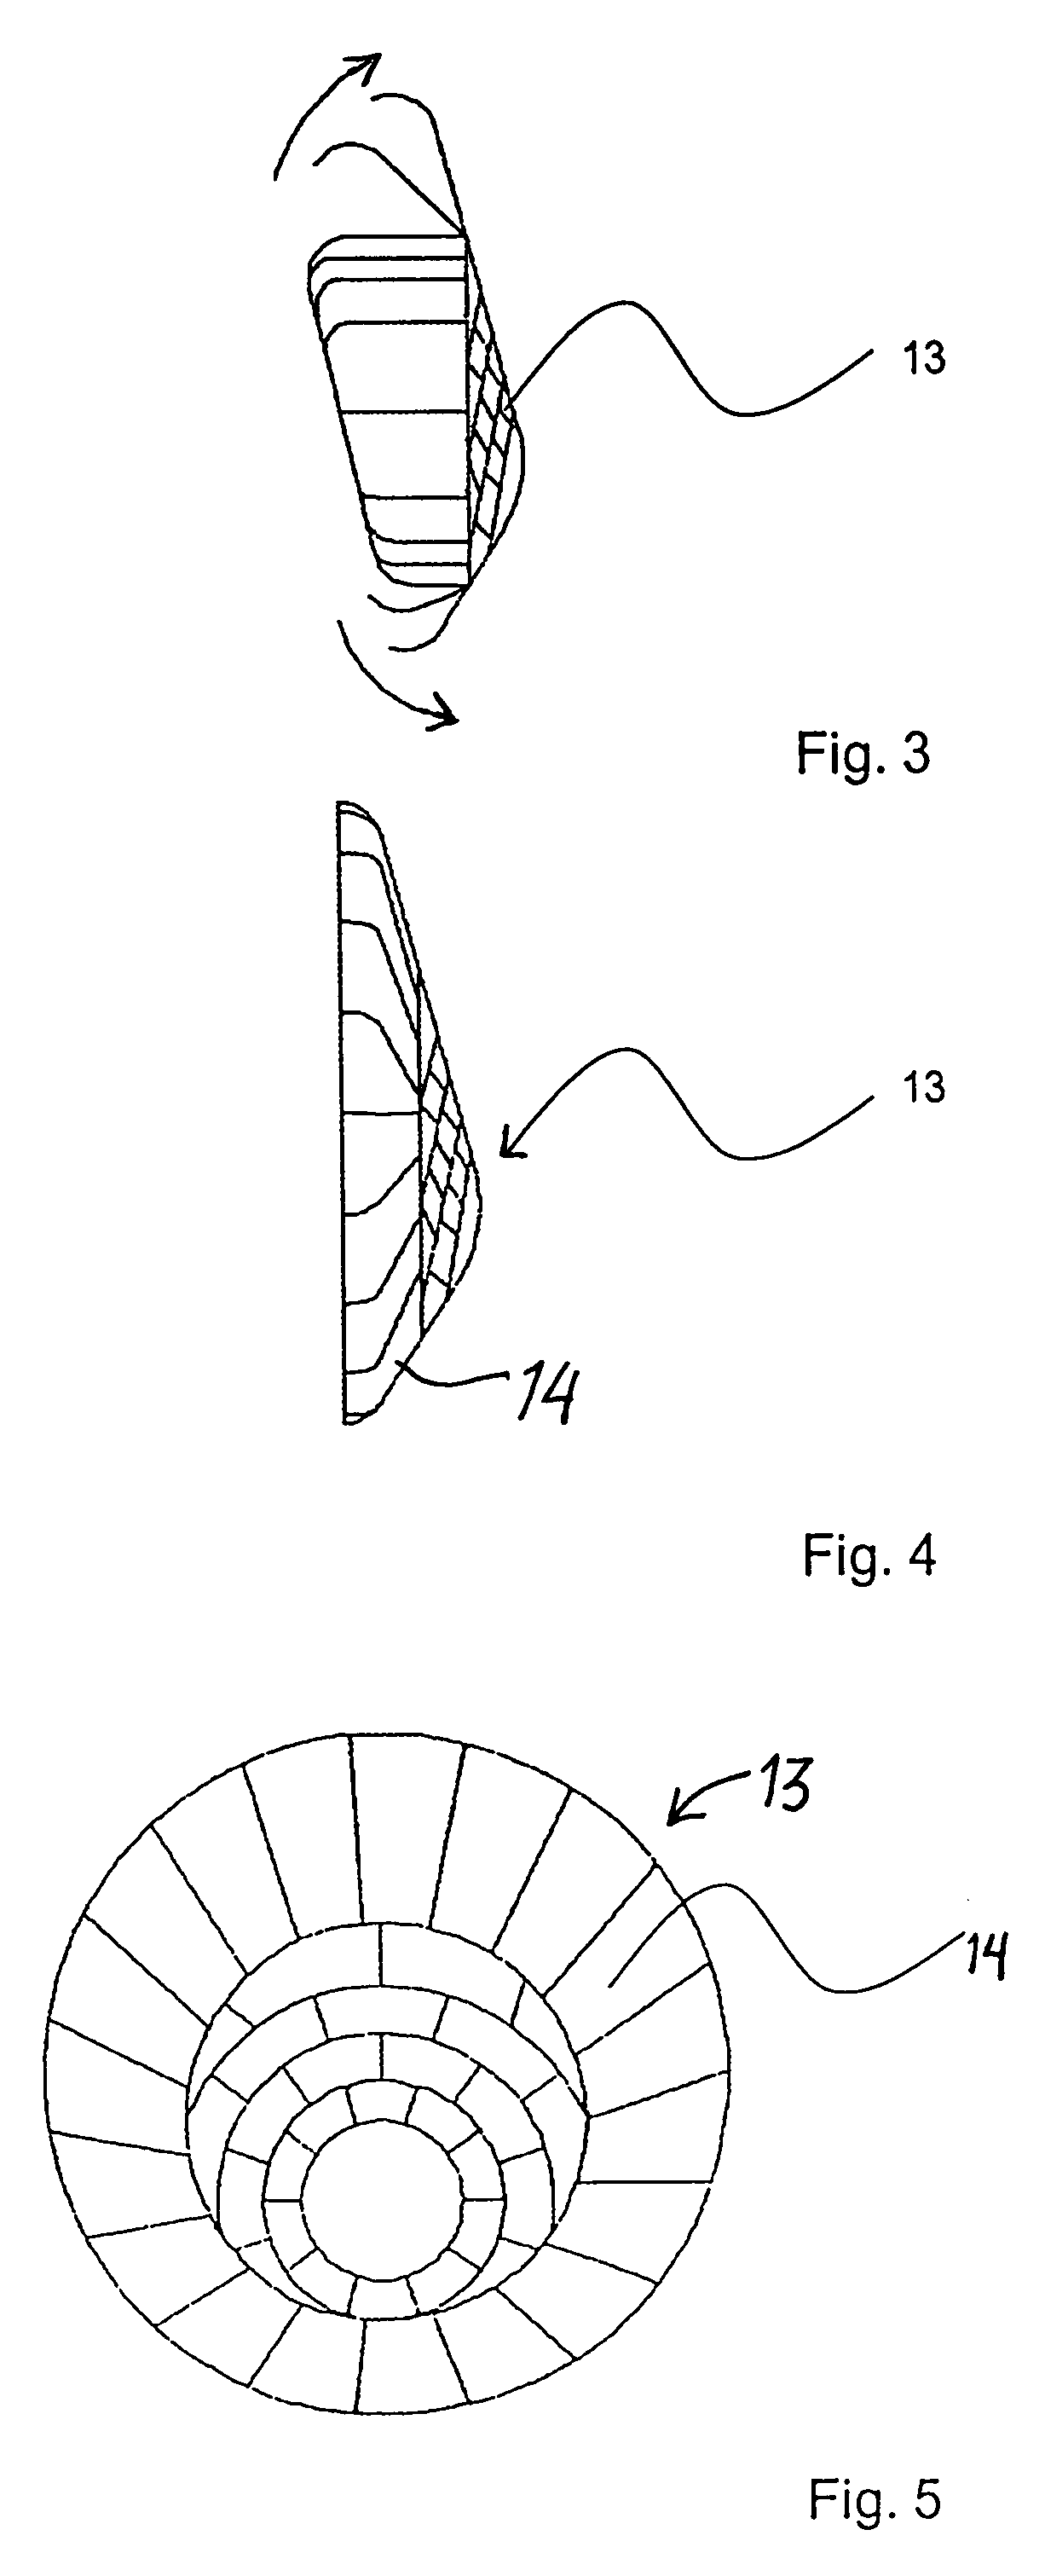 Deployable heat shield and deceleration structure for spacecraft